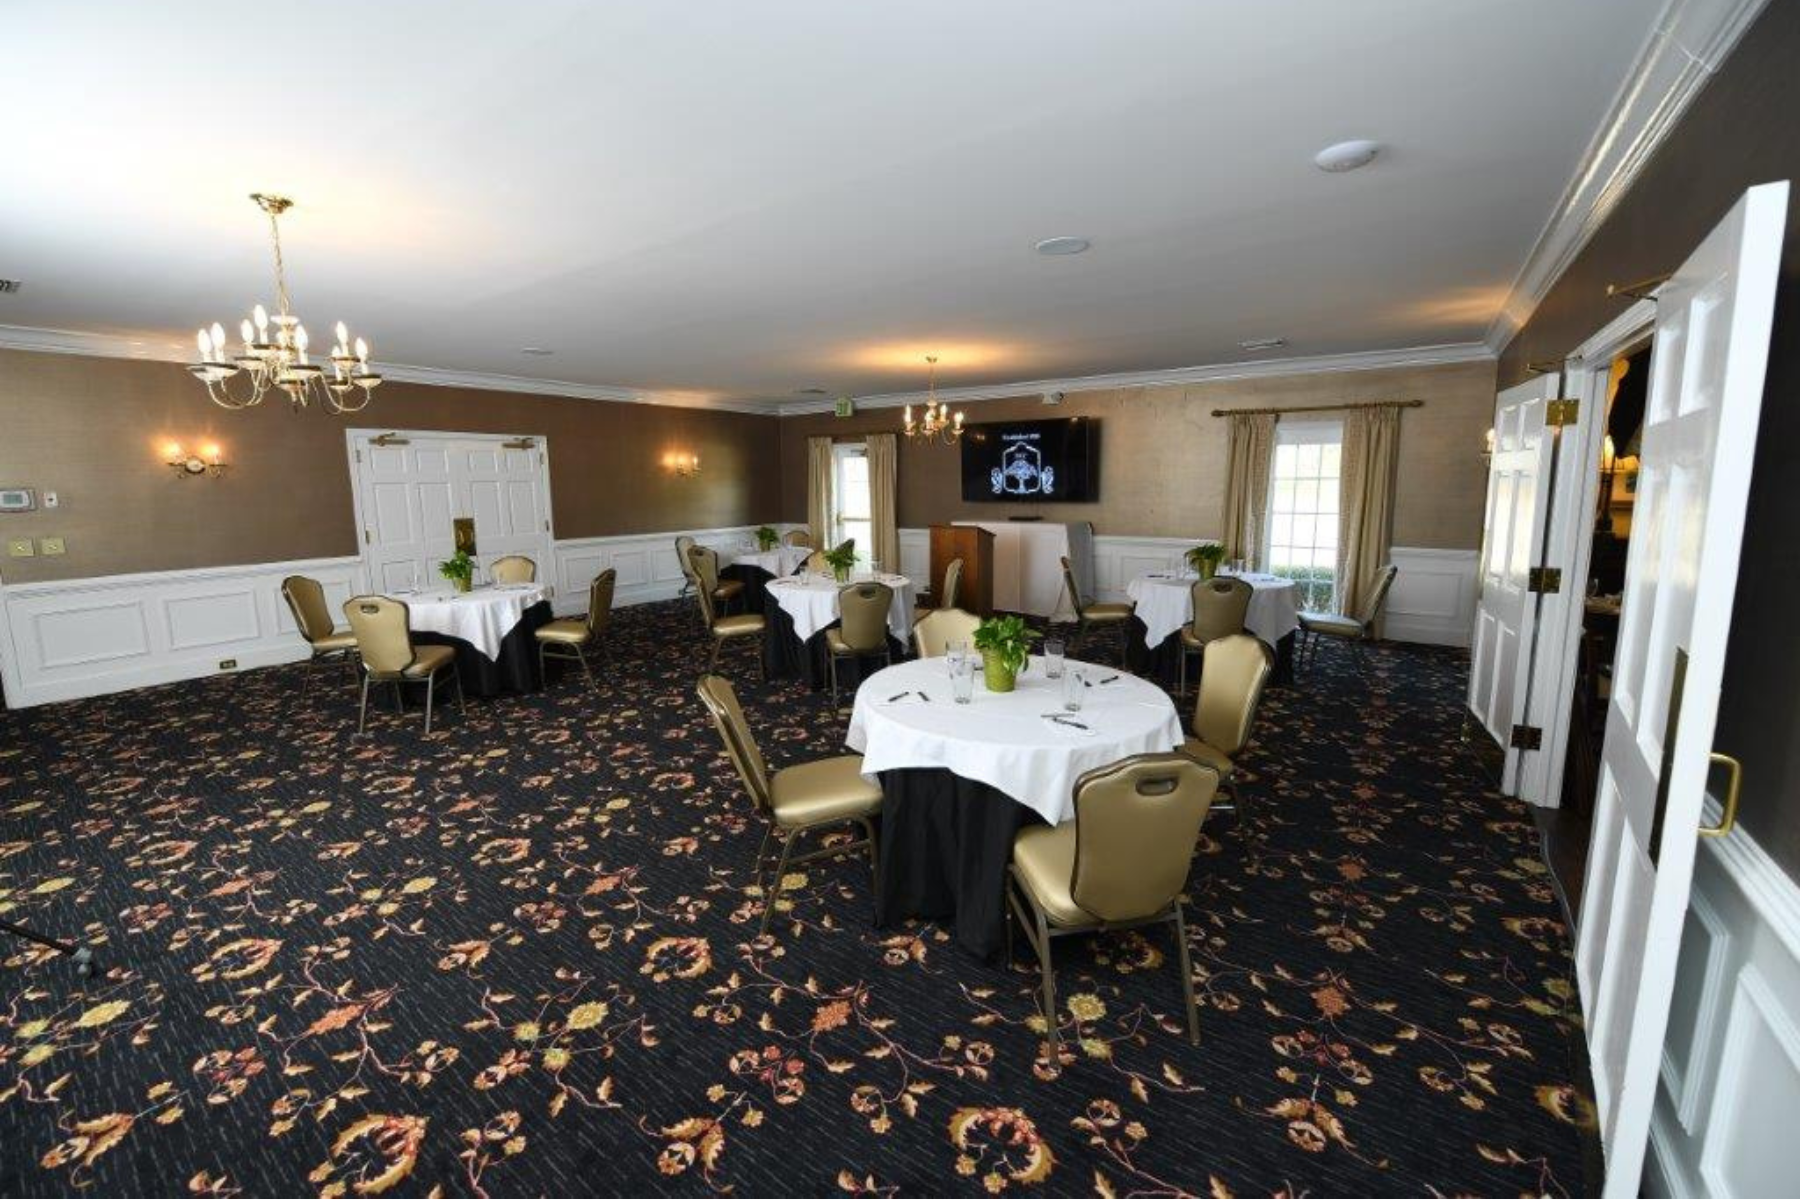 Meeting room with chandeliers, a floral pattern rug, and dining areas at Darlington Country Club